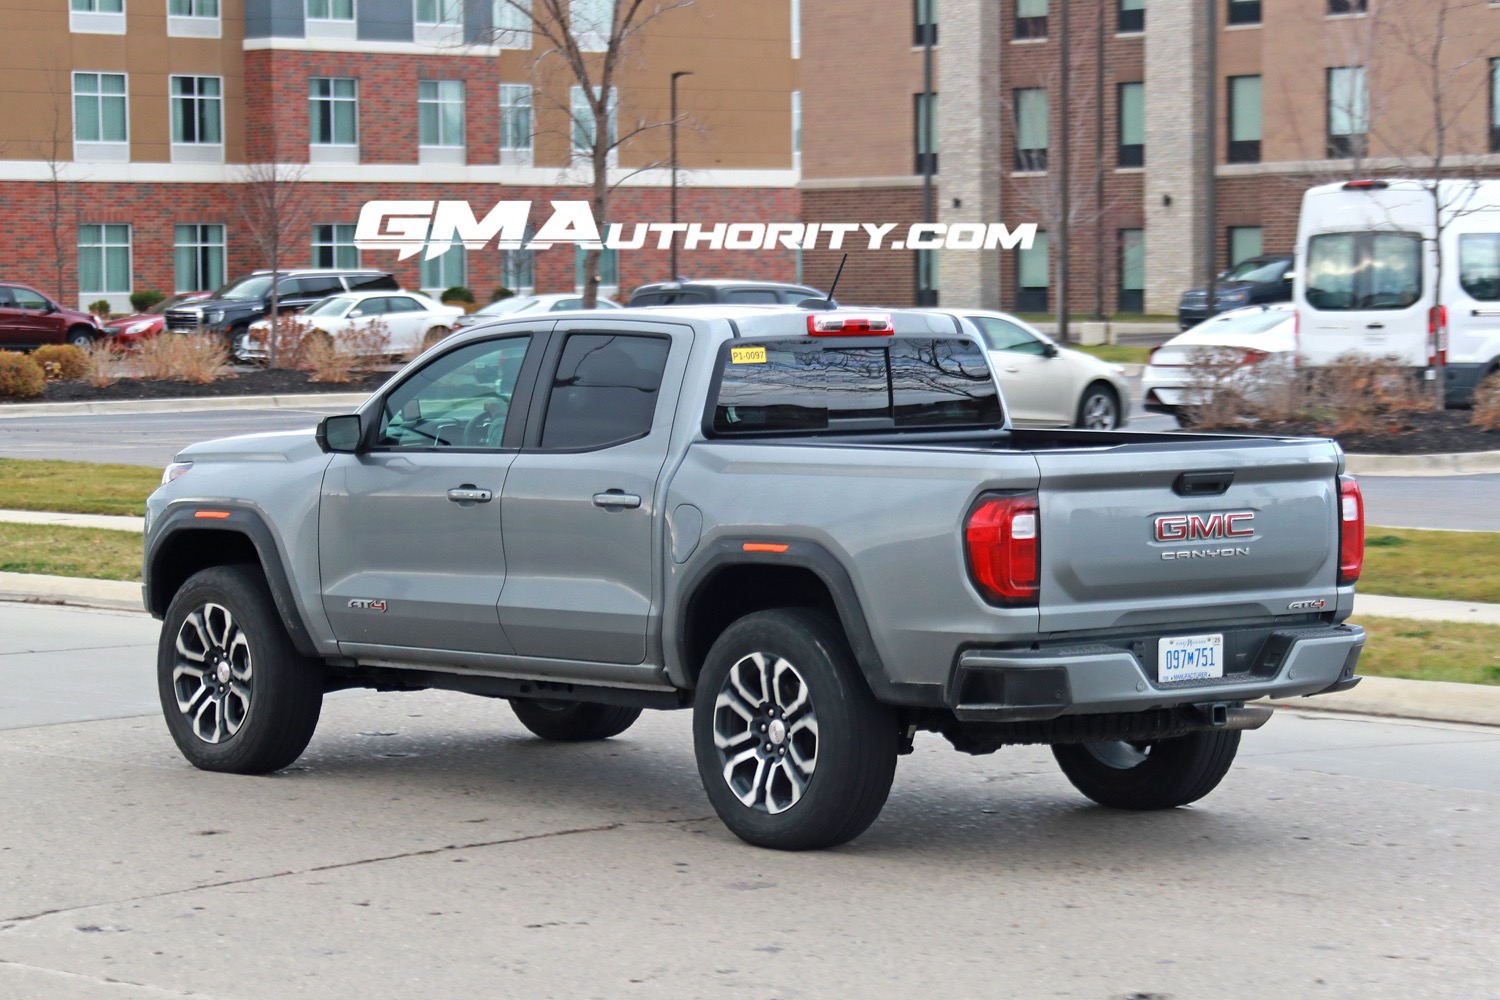 2023-gmc-canyon-at4-sterling-metallic-gxd-20-inch-wheels-rd5-real-world-photos-exterior3-chevrolet-colorado-trail-boss-sterling-gray-metallic-gxd-first-real-world-photos-exterior-008